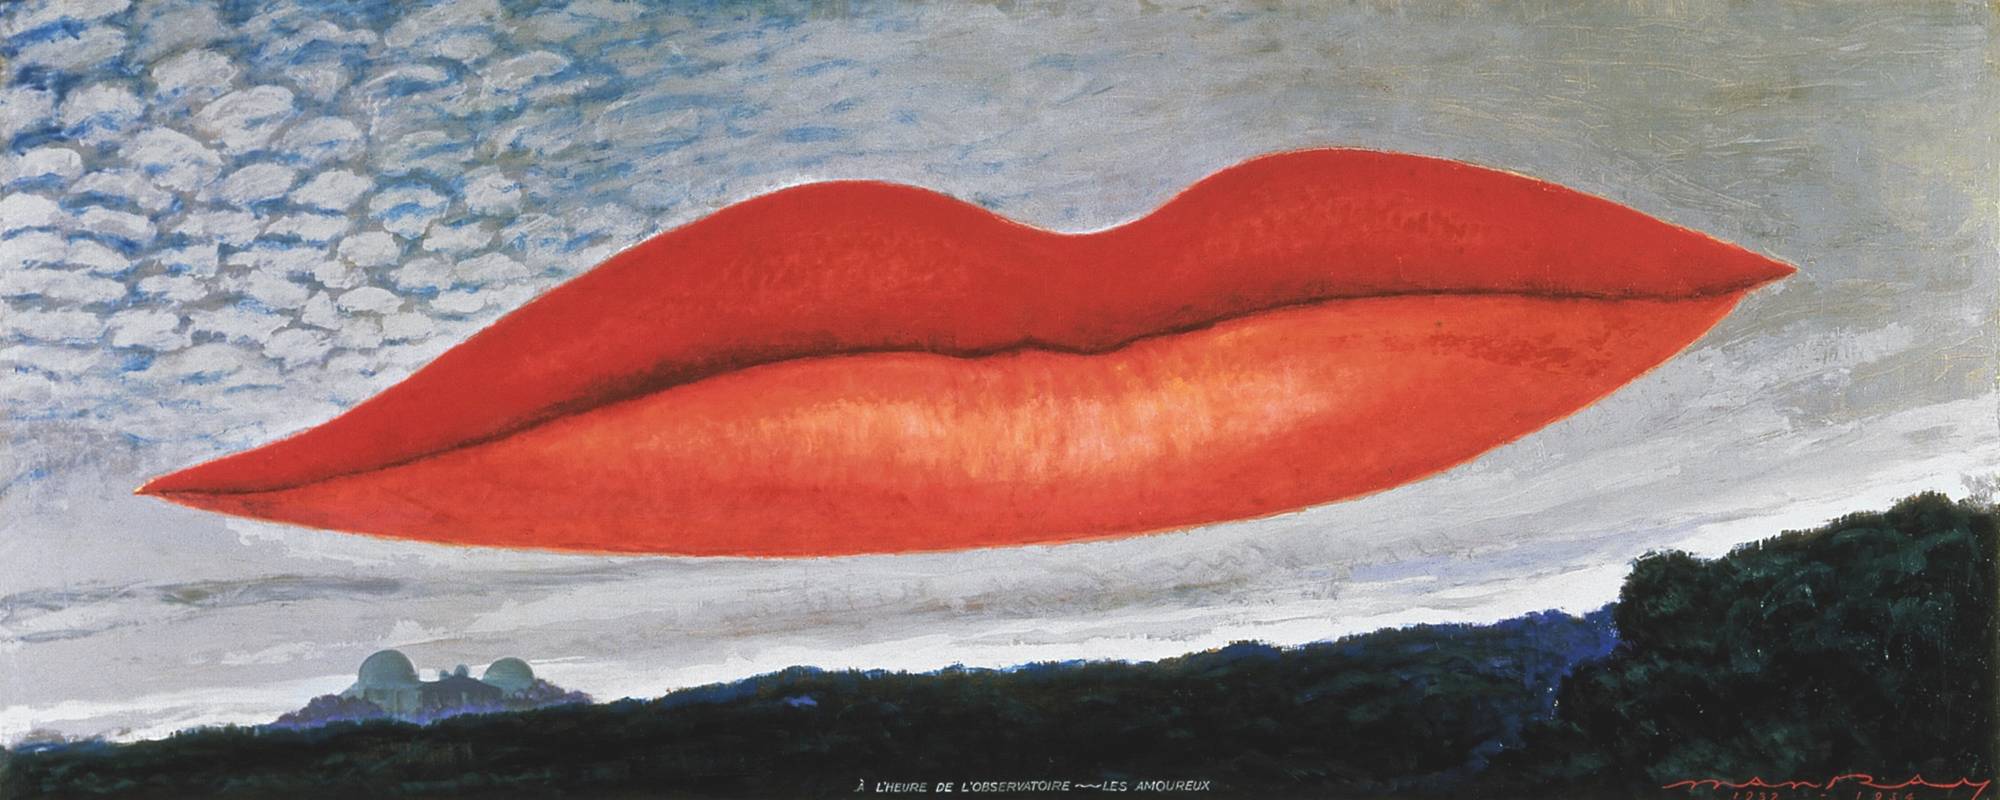 https://buro247.rs/wp-content/uploads/2019/04/Man-Ray-Observatory-time-HI-RES-2000x800-2.jpg